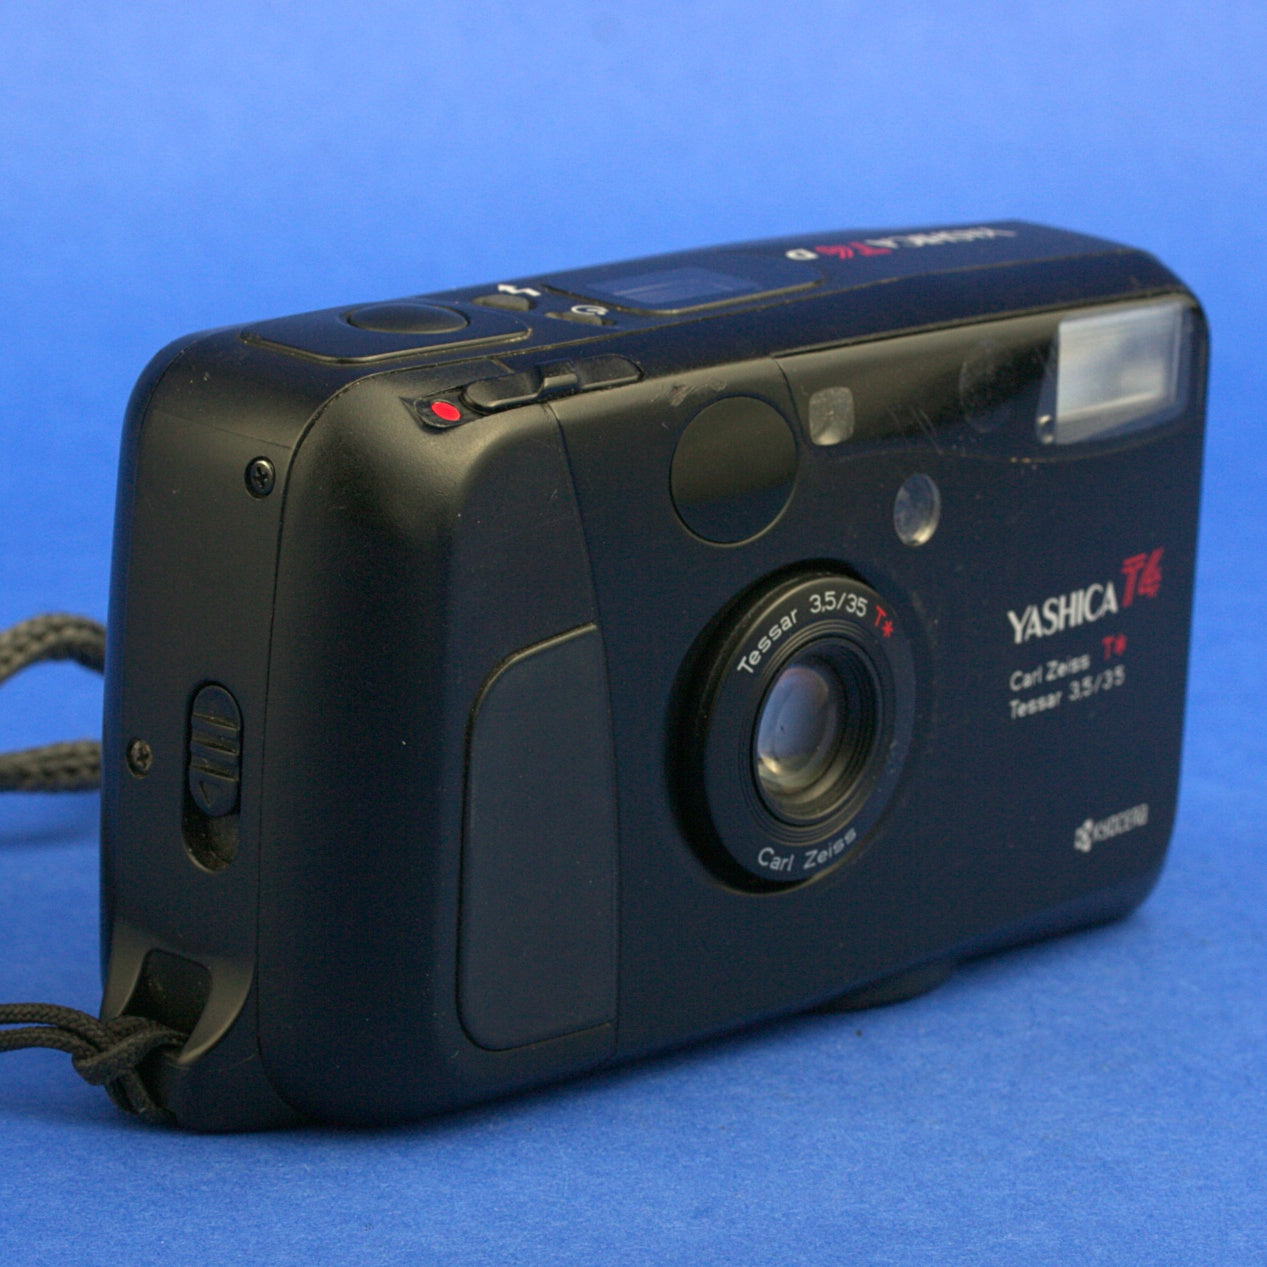 Yashica T4 D Film Camera Not Working